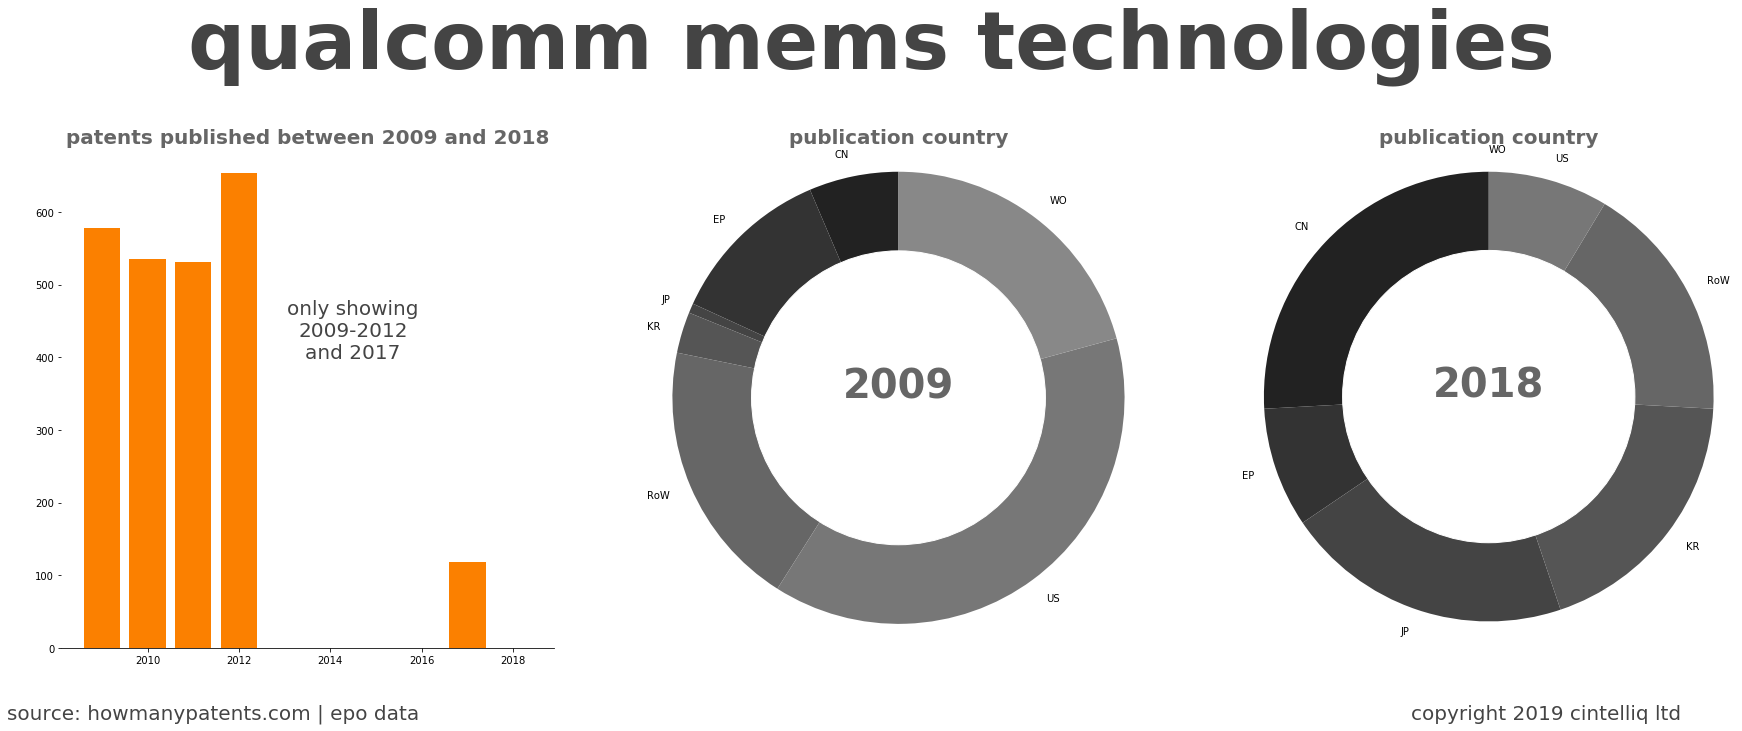 summary of patents for Qualcomm Mems Technologies